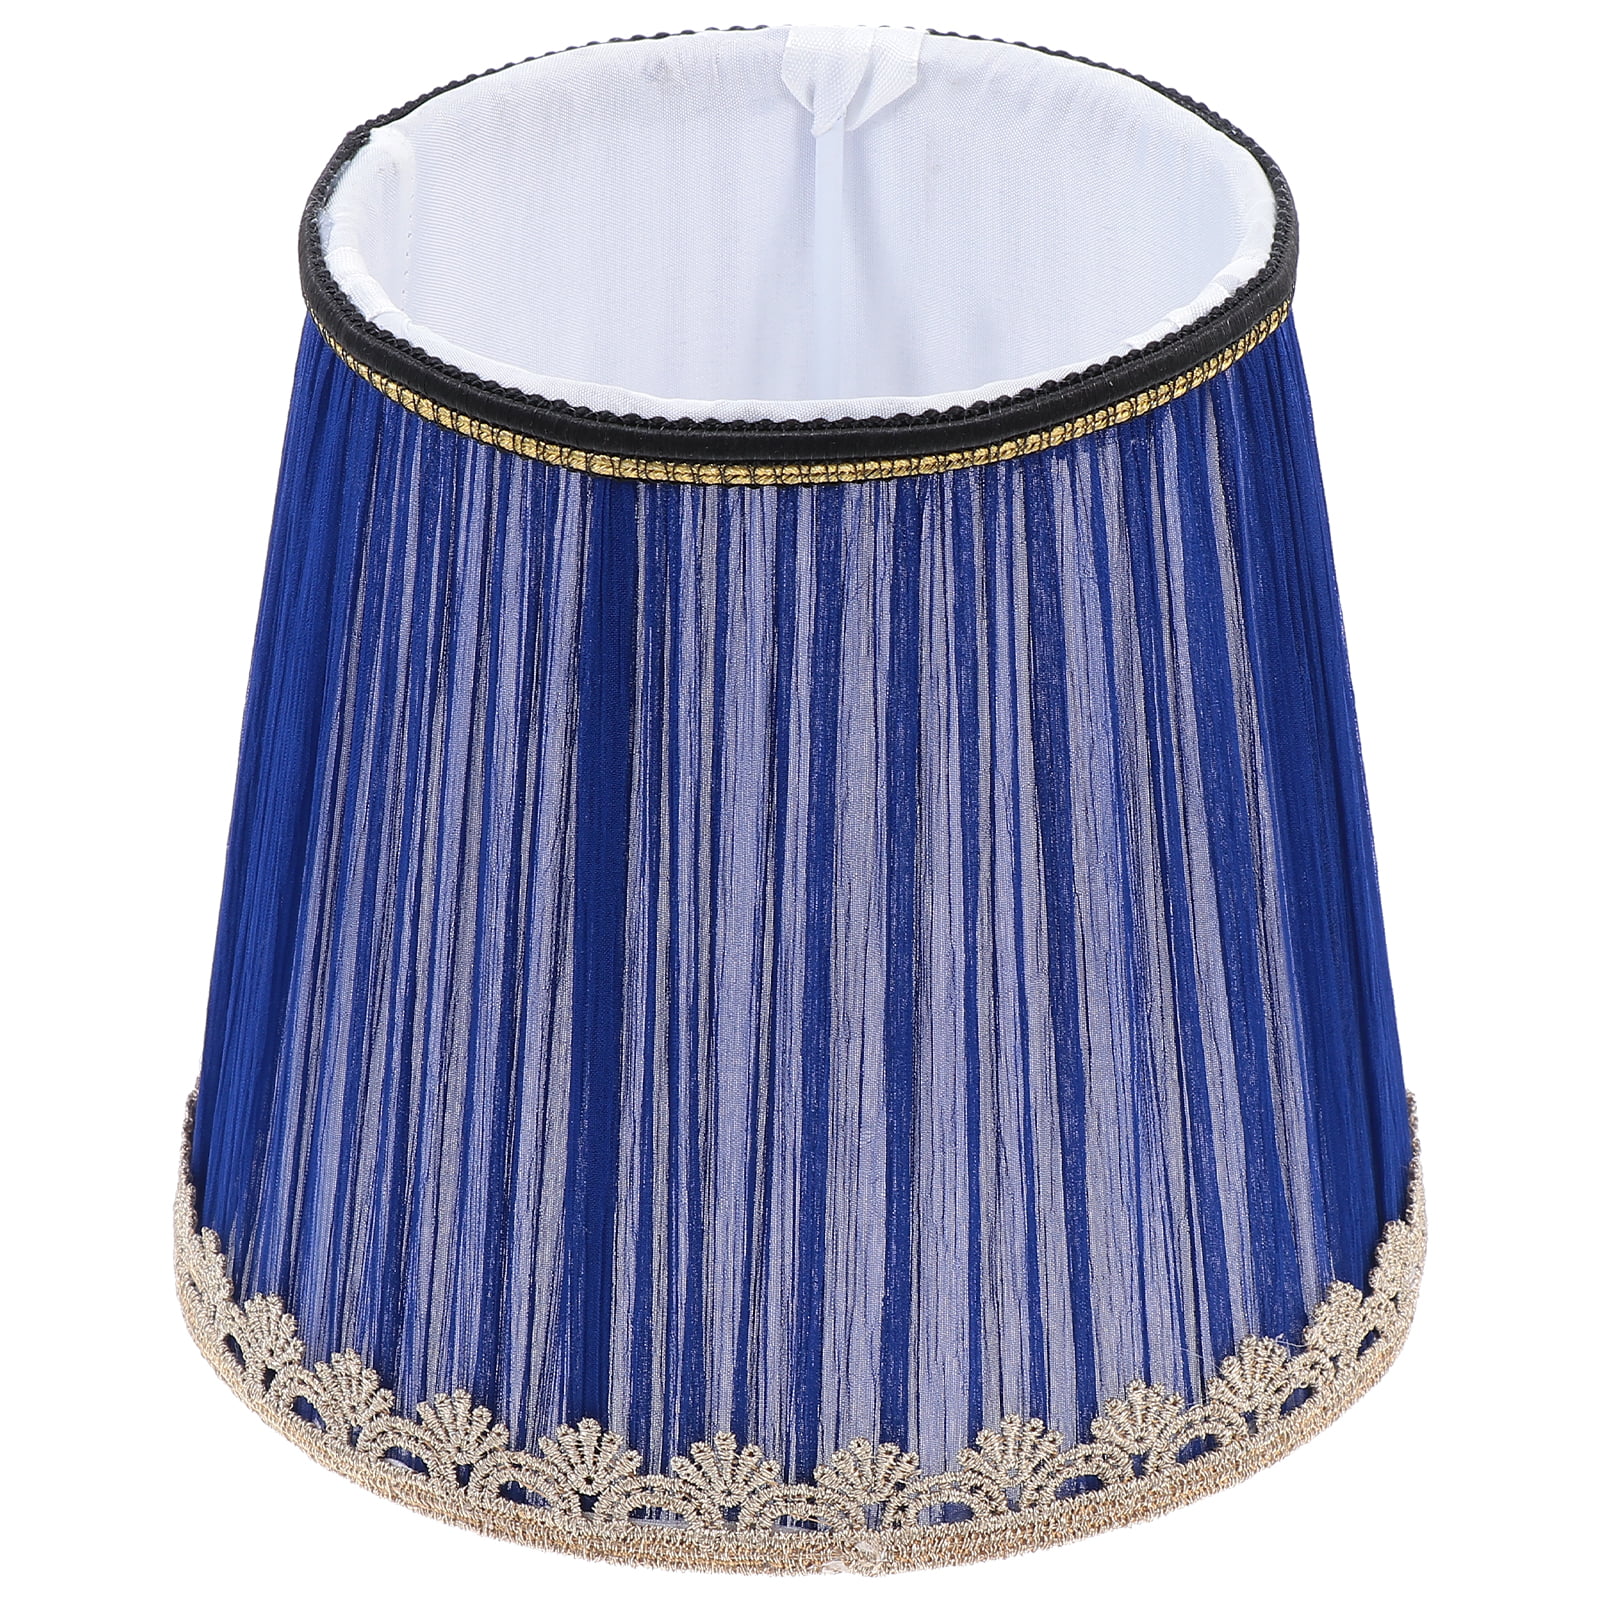 1Pc Decorative Lamp Shade Household Lampshade Transparent Lamp Cover for Bedroom 